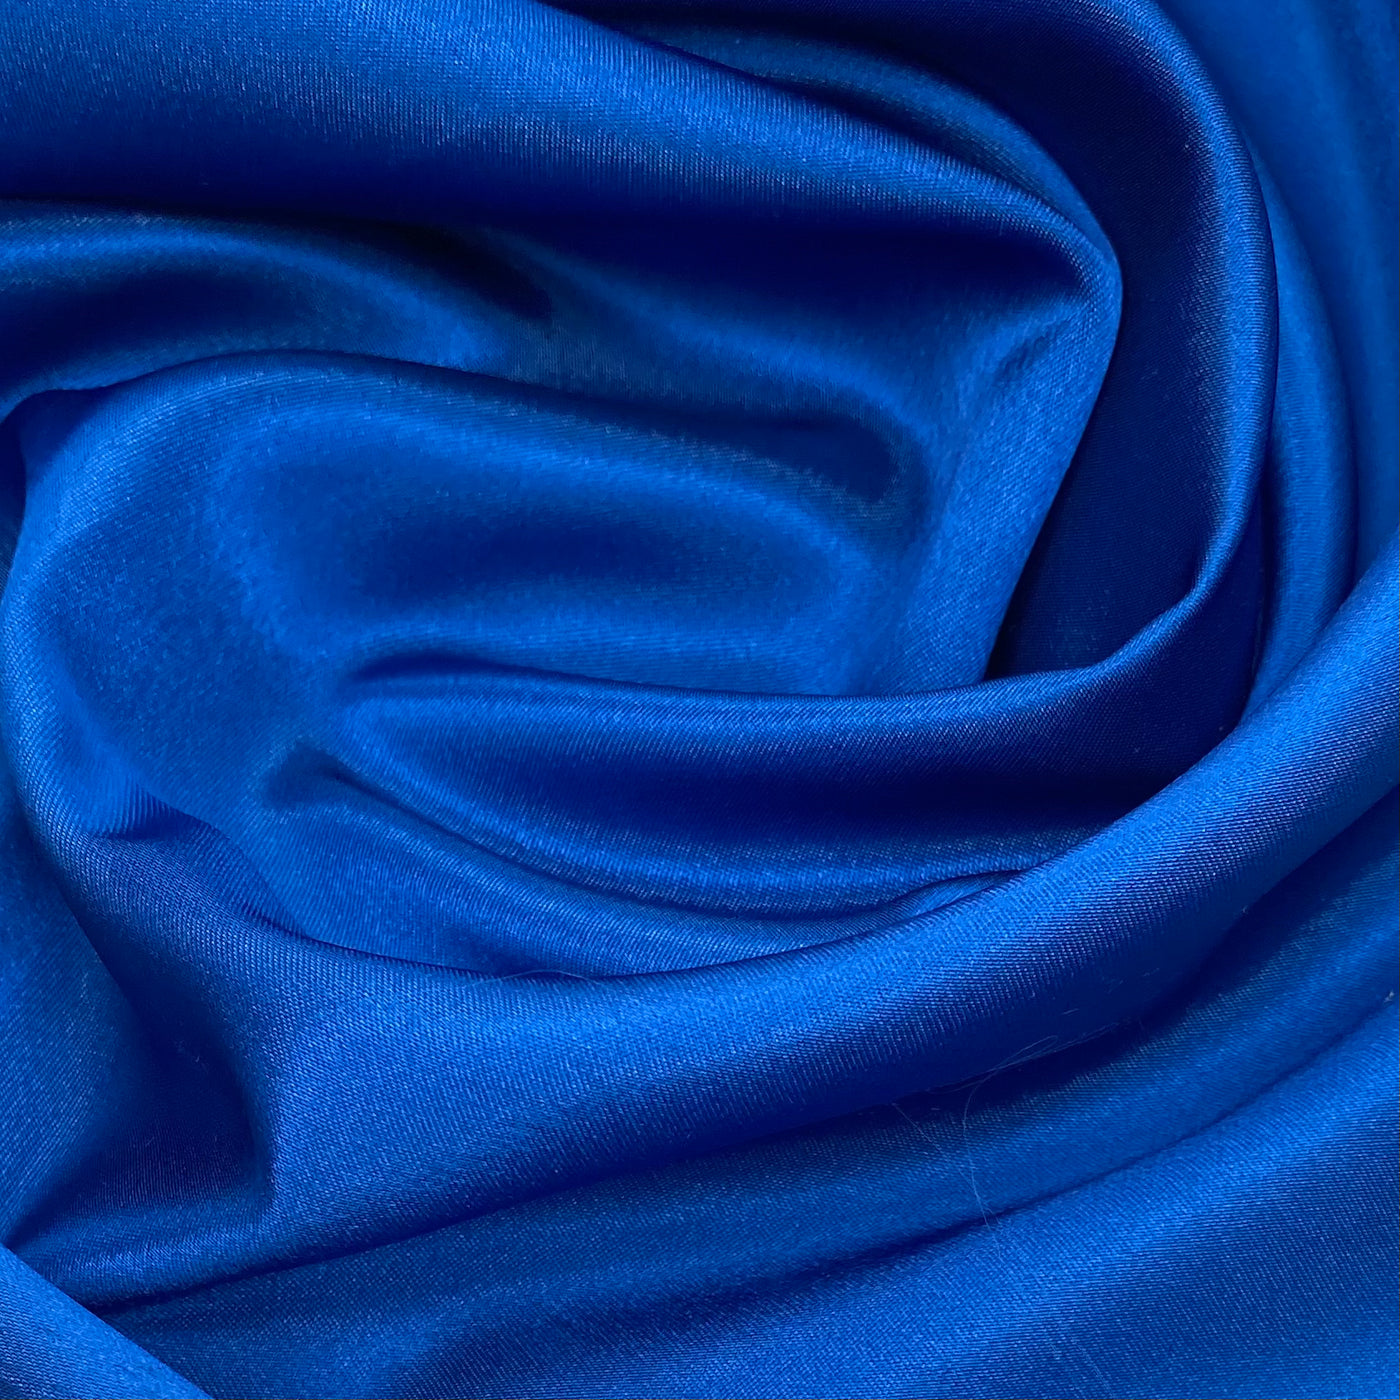 Polyester Charmeuse - 58” - Blue